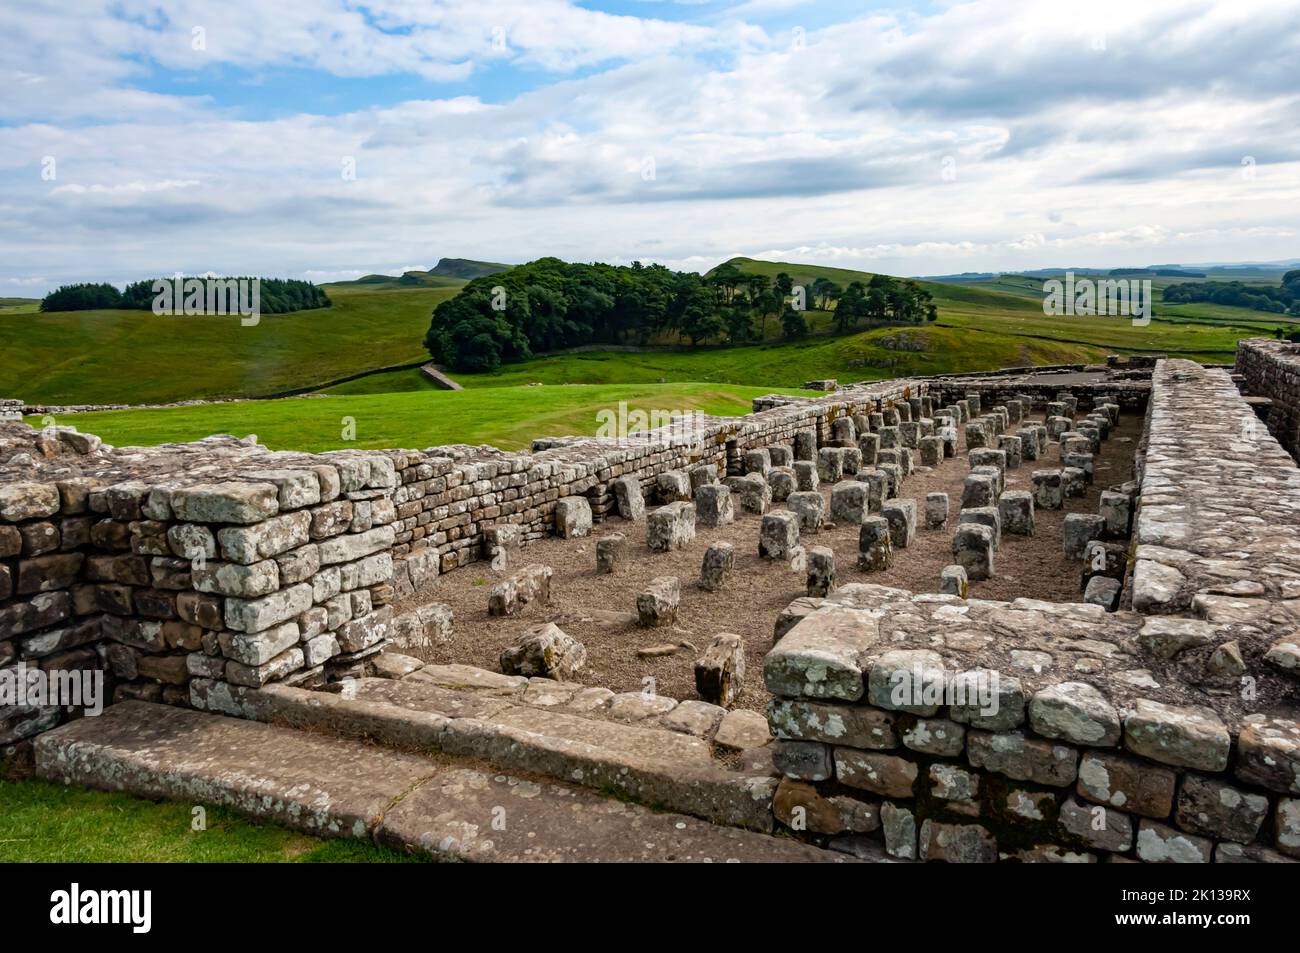 Housesteads Roman Fort, Vercovicium, AD 124, Granary showing provision for underfloor heating, Hadrians Wall Stock Photo